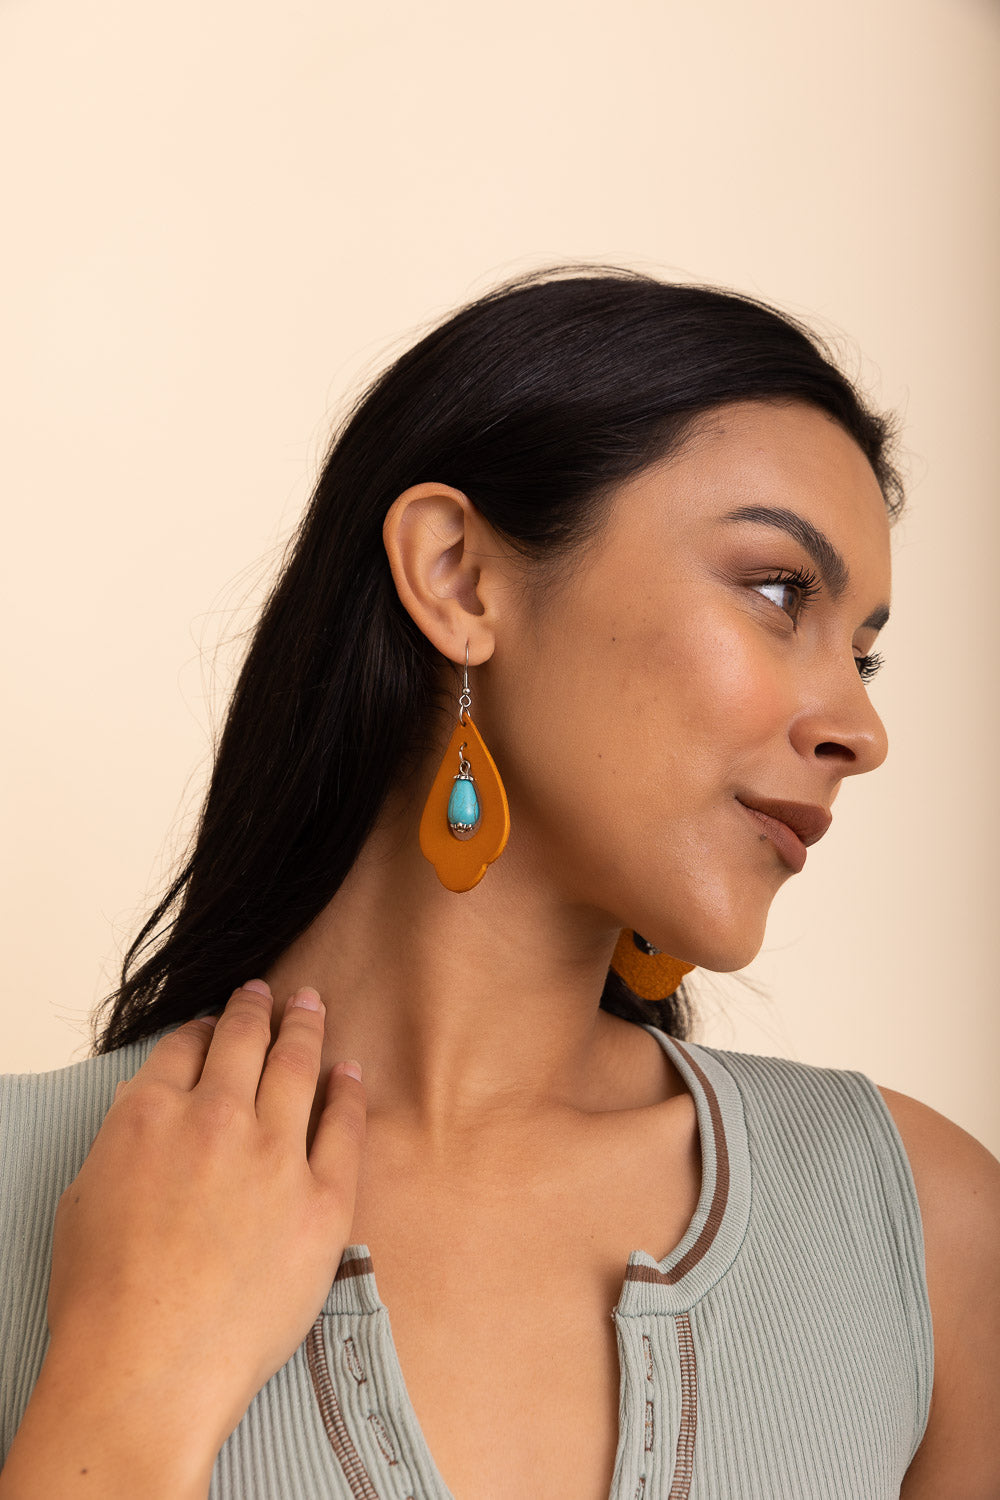 Western Leather Cutout Earrings w/ Turquoise Stone Jewelry